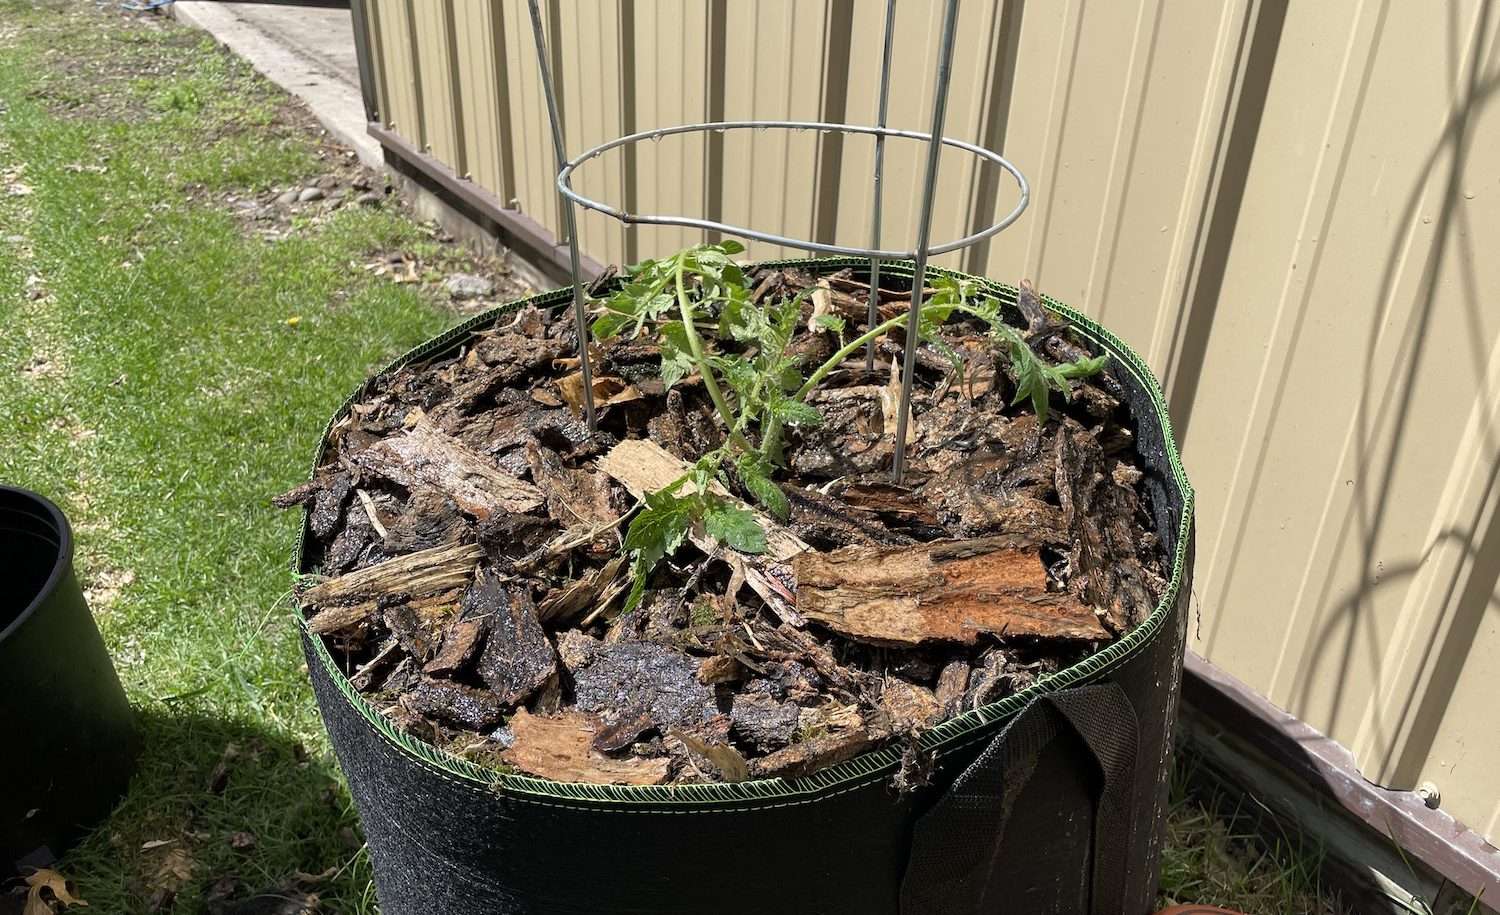 A completed planting of a tomato in a grow bag outside